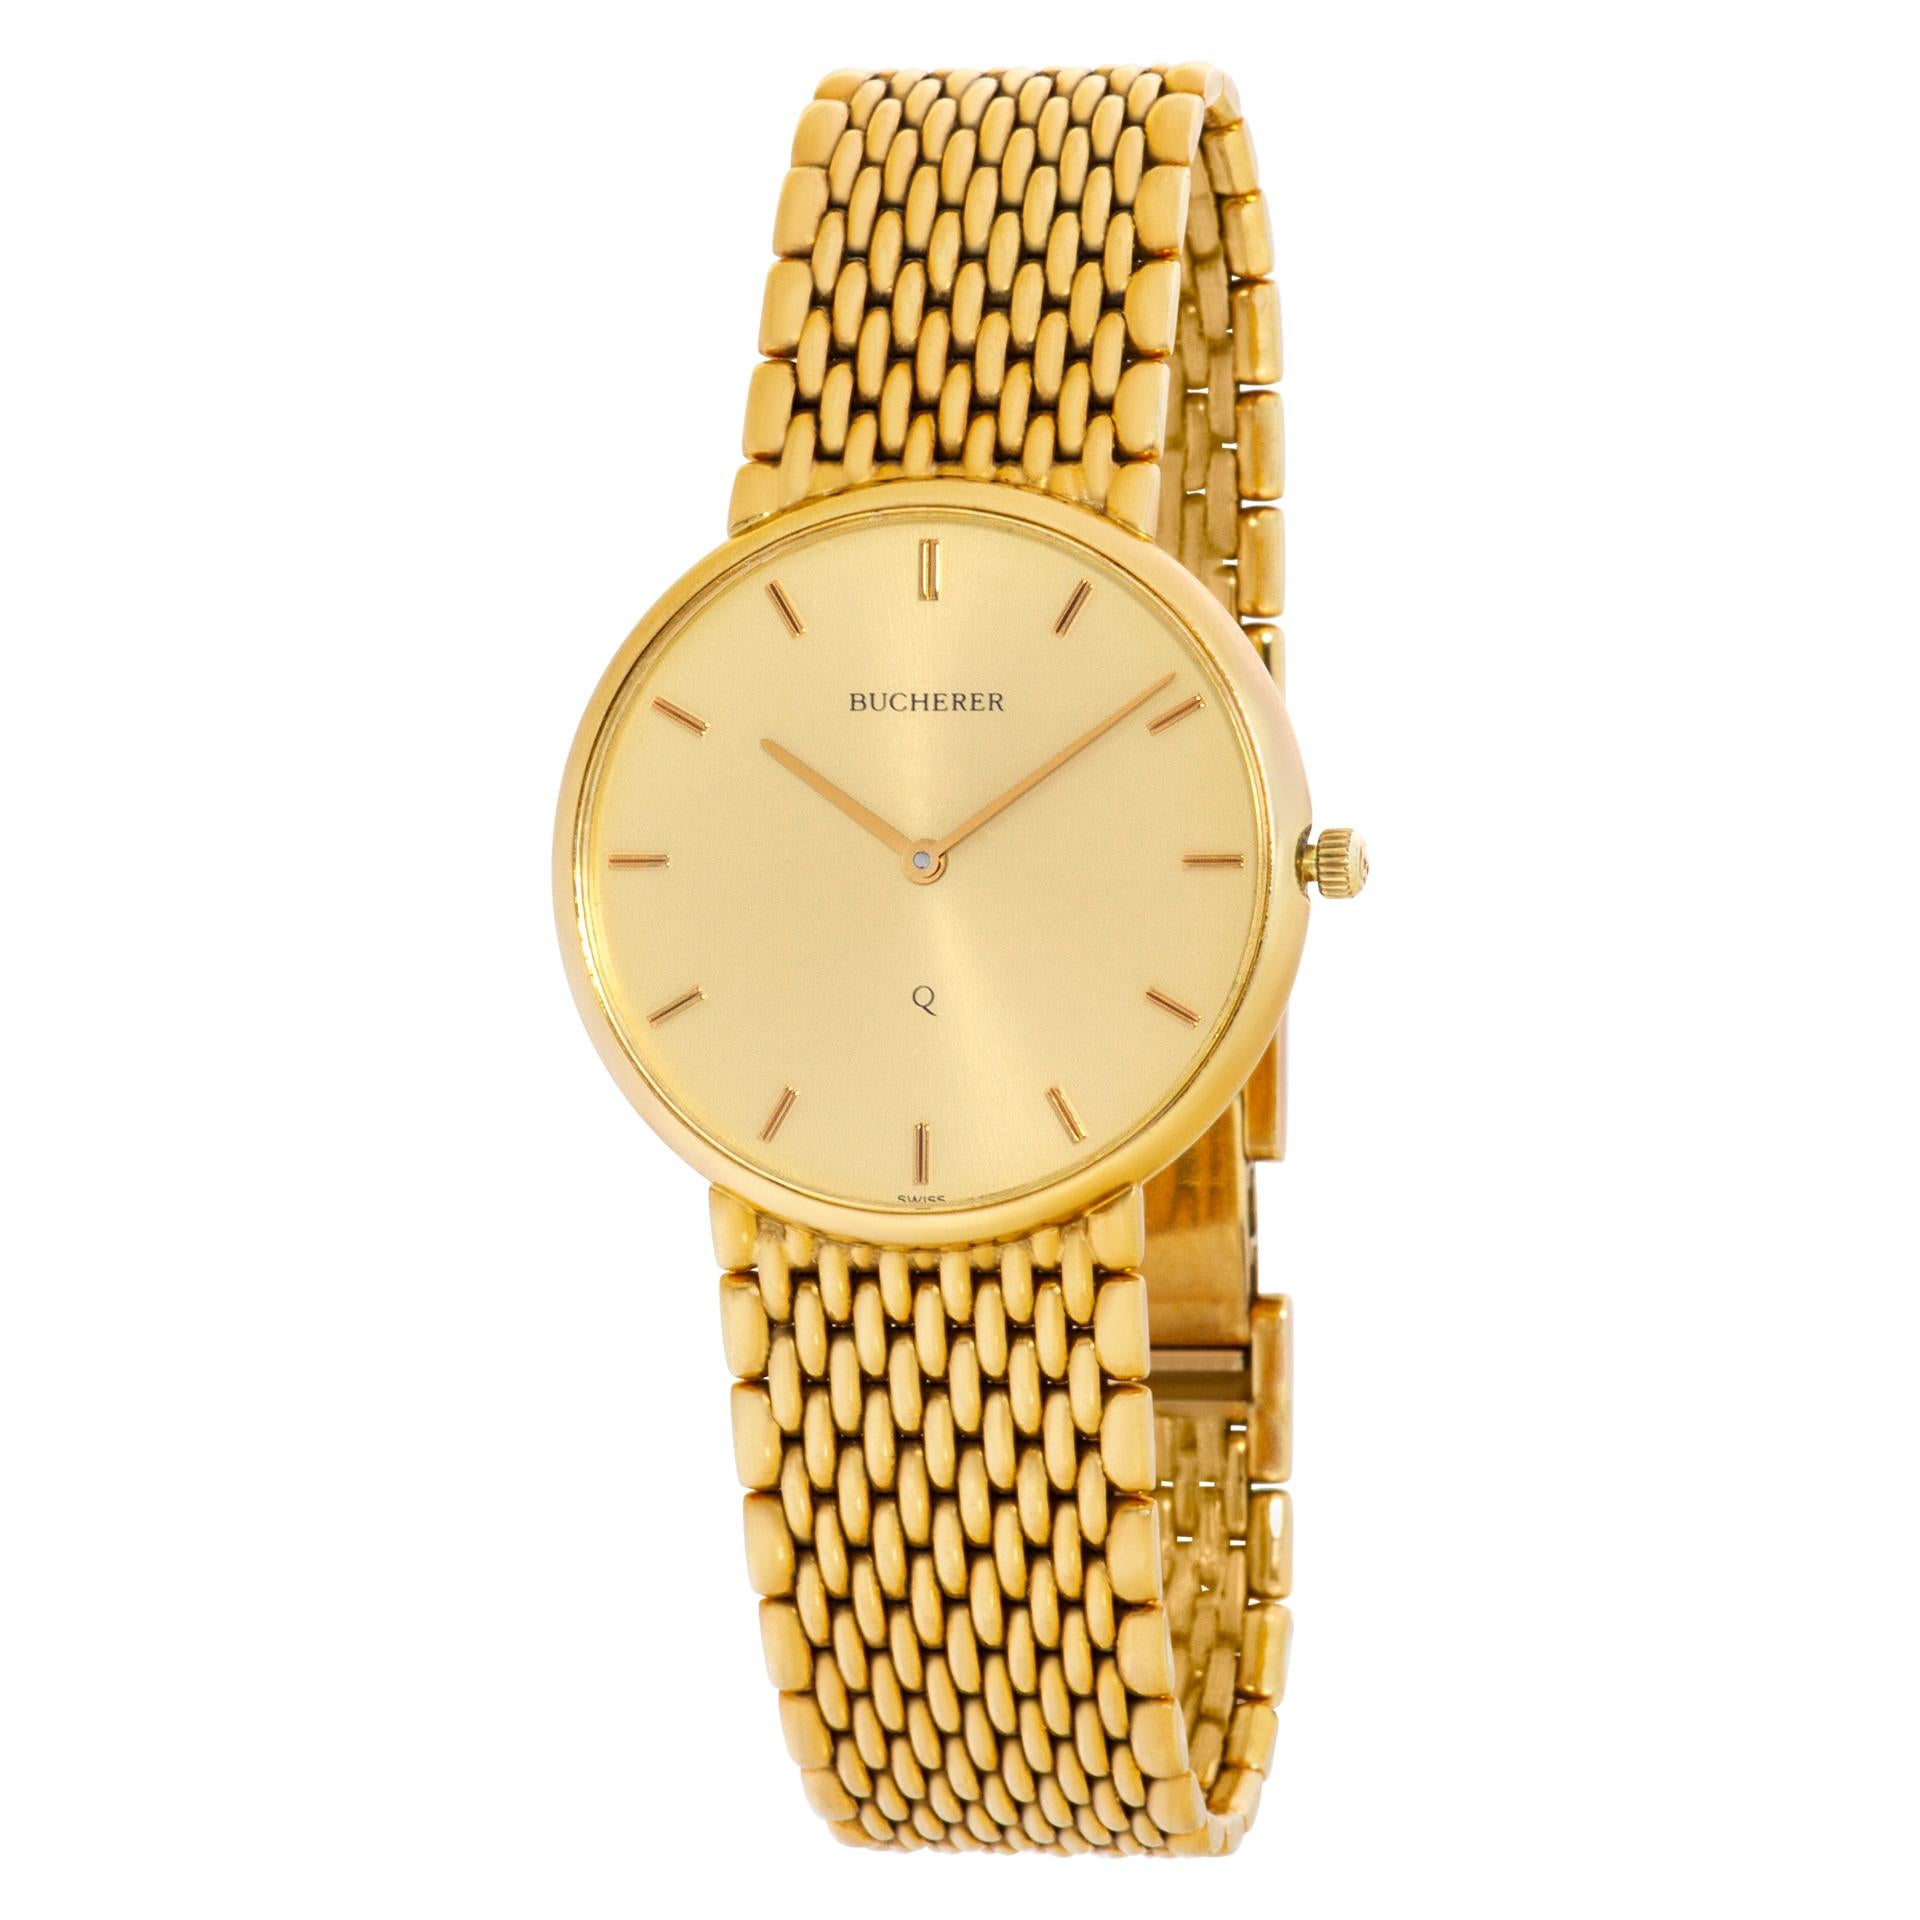 Bucherer Classic in 18k on a mesh band. Fits 7 inches. Quartz. 32 mm case size. Ref 255.027. Circa 1990s. Fine Pre-owned Bucherer Watch.   Certified preowned Classic Bucherer Classic 255.027 watch is made out of yellow gold on a 18k bracelet with a